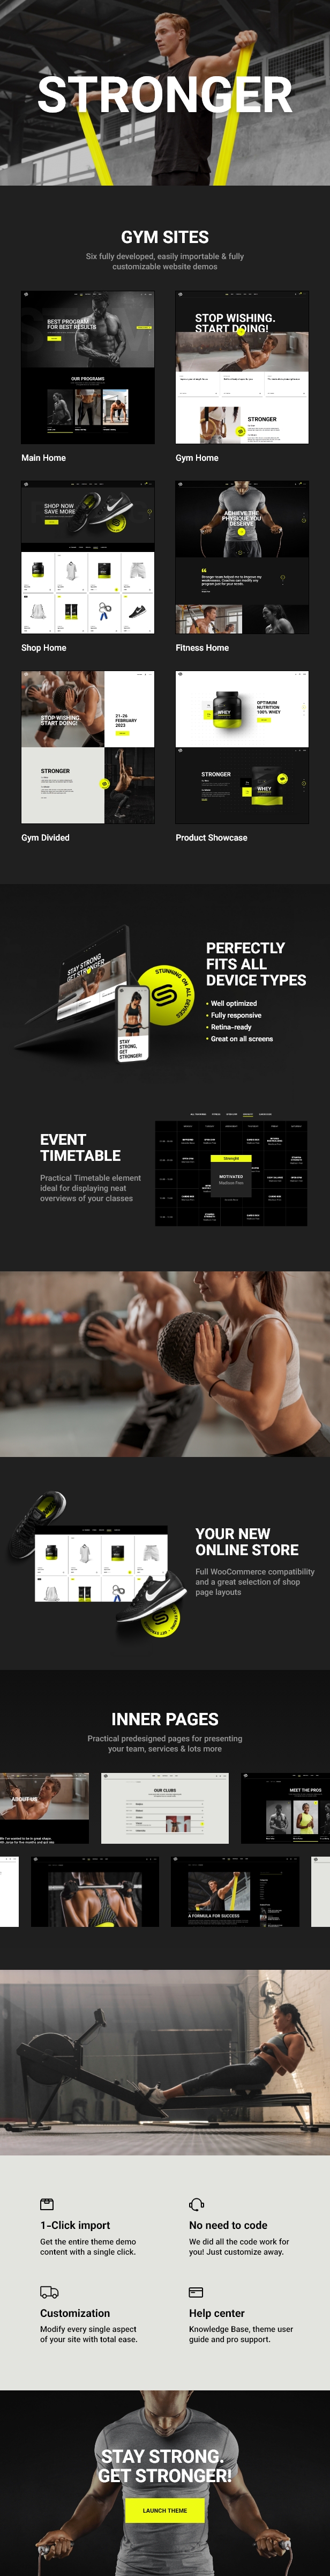 Stronger - Gym and Fitness Theme - 3